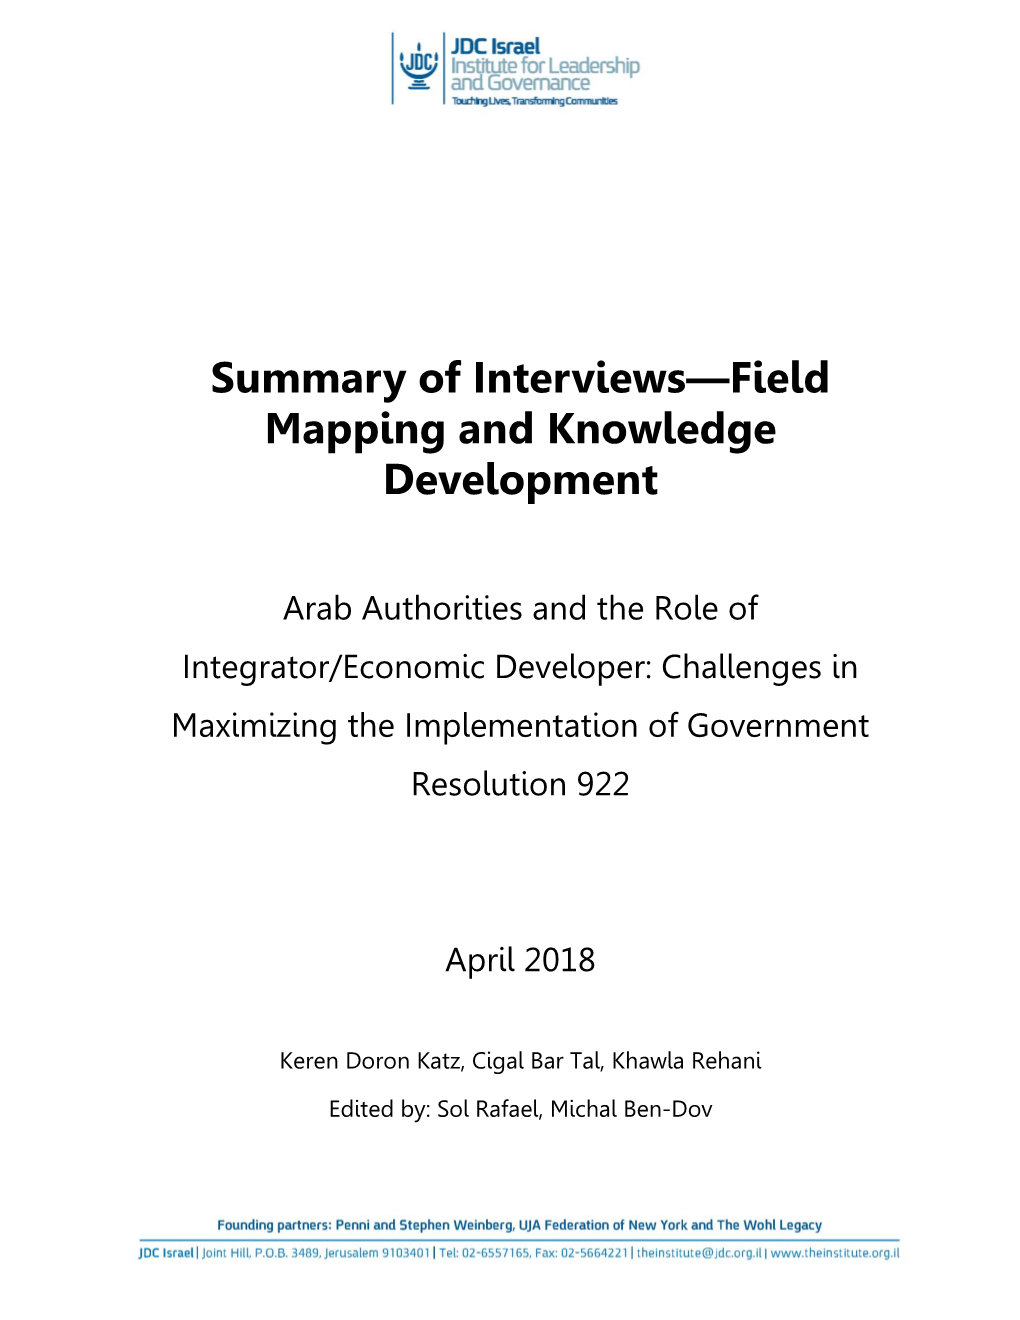 Summary of Interviews—Field Mapping and Knowledge Development